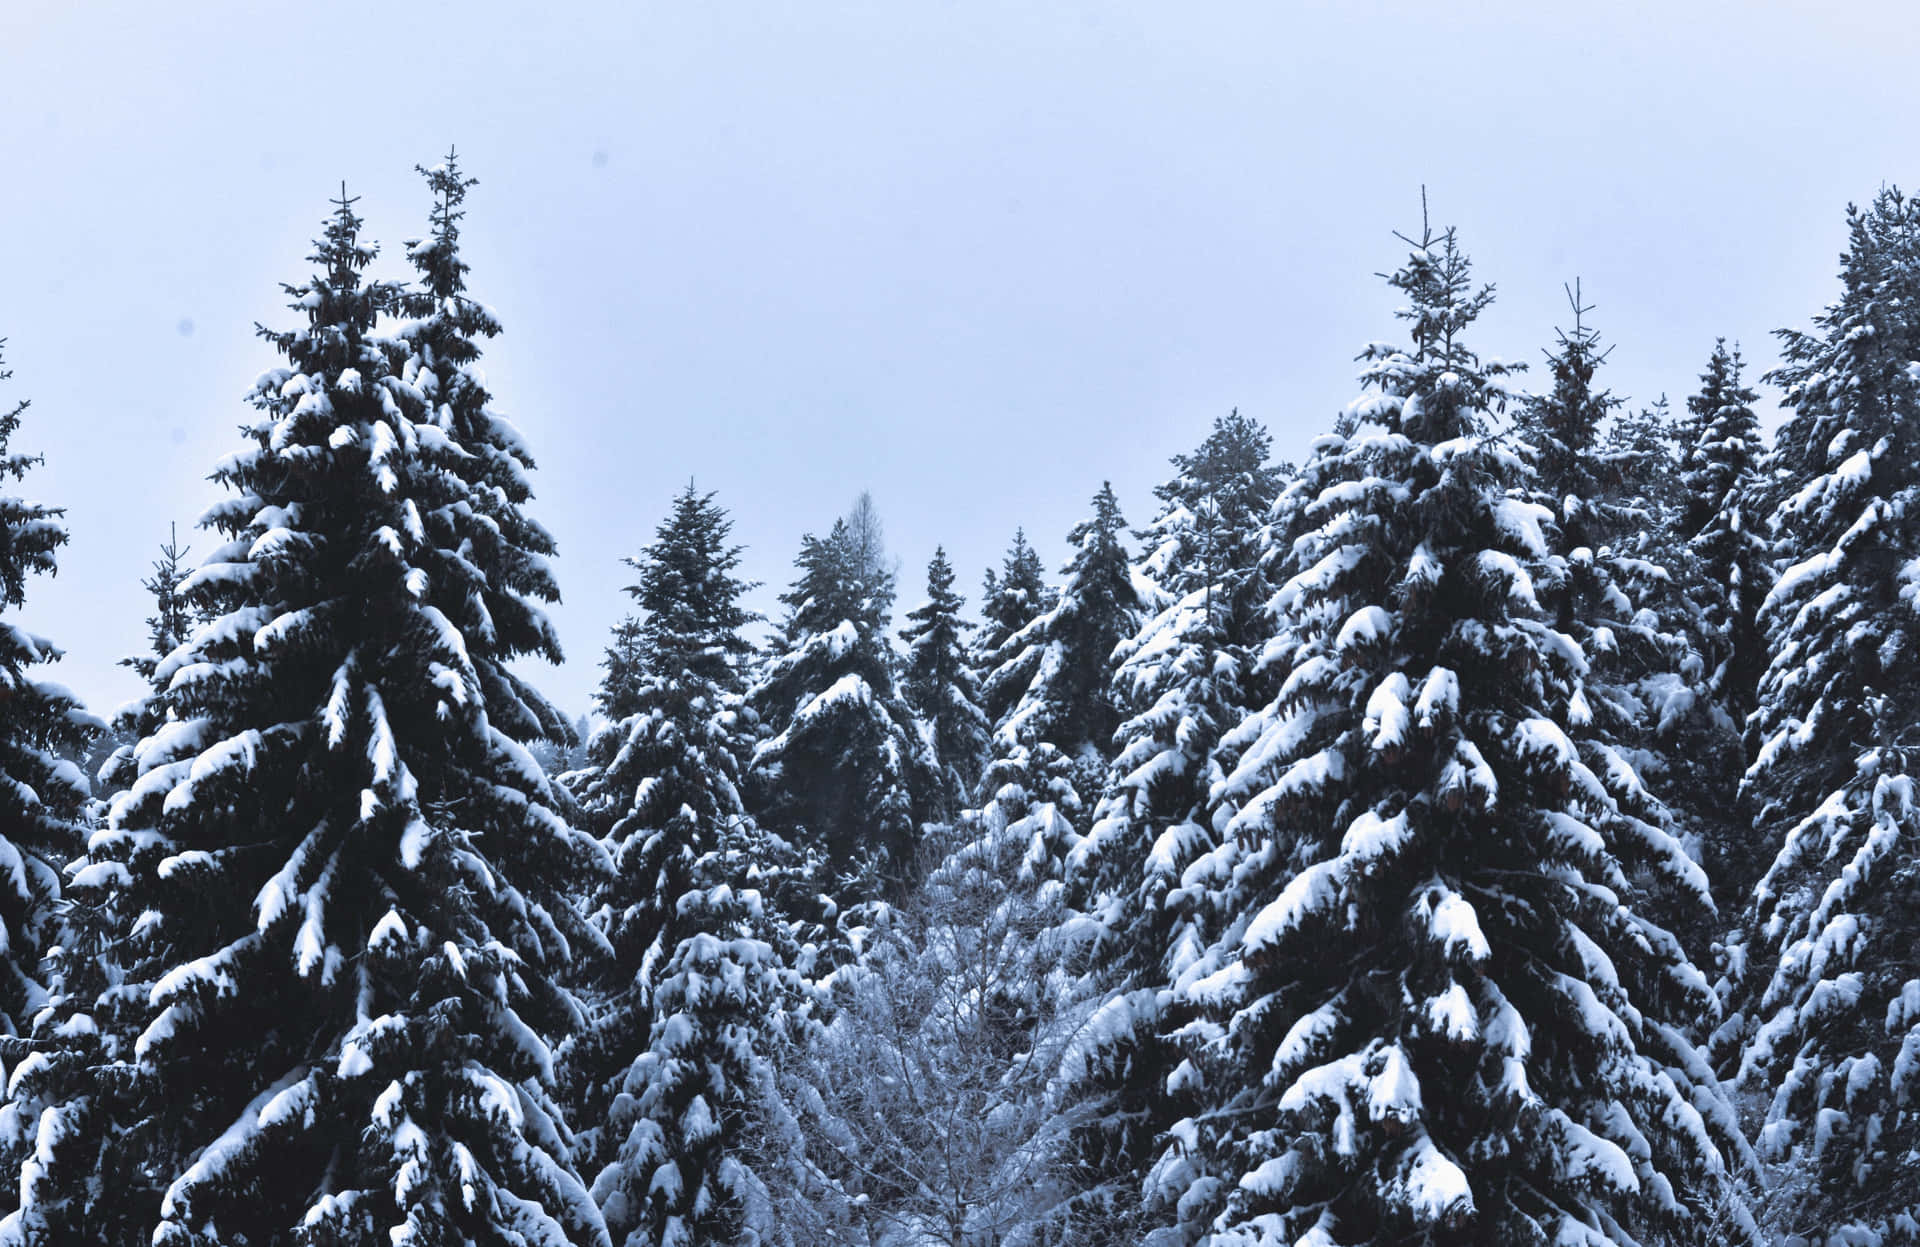 A peaceful winter in a snow-filled forest